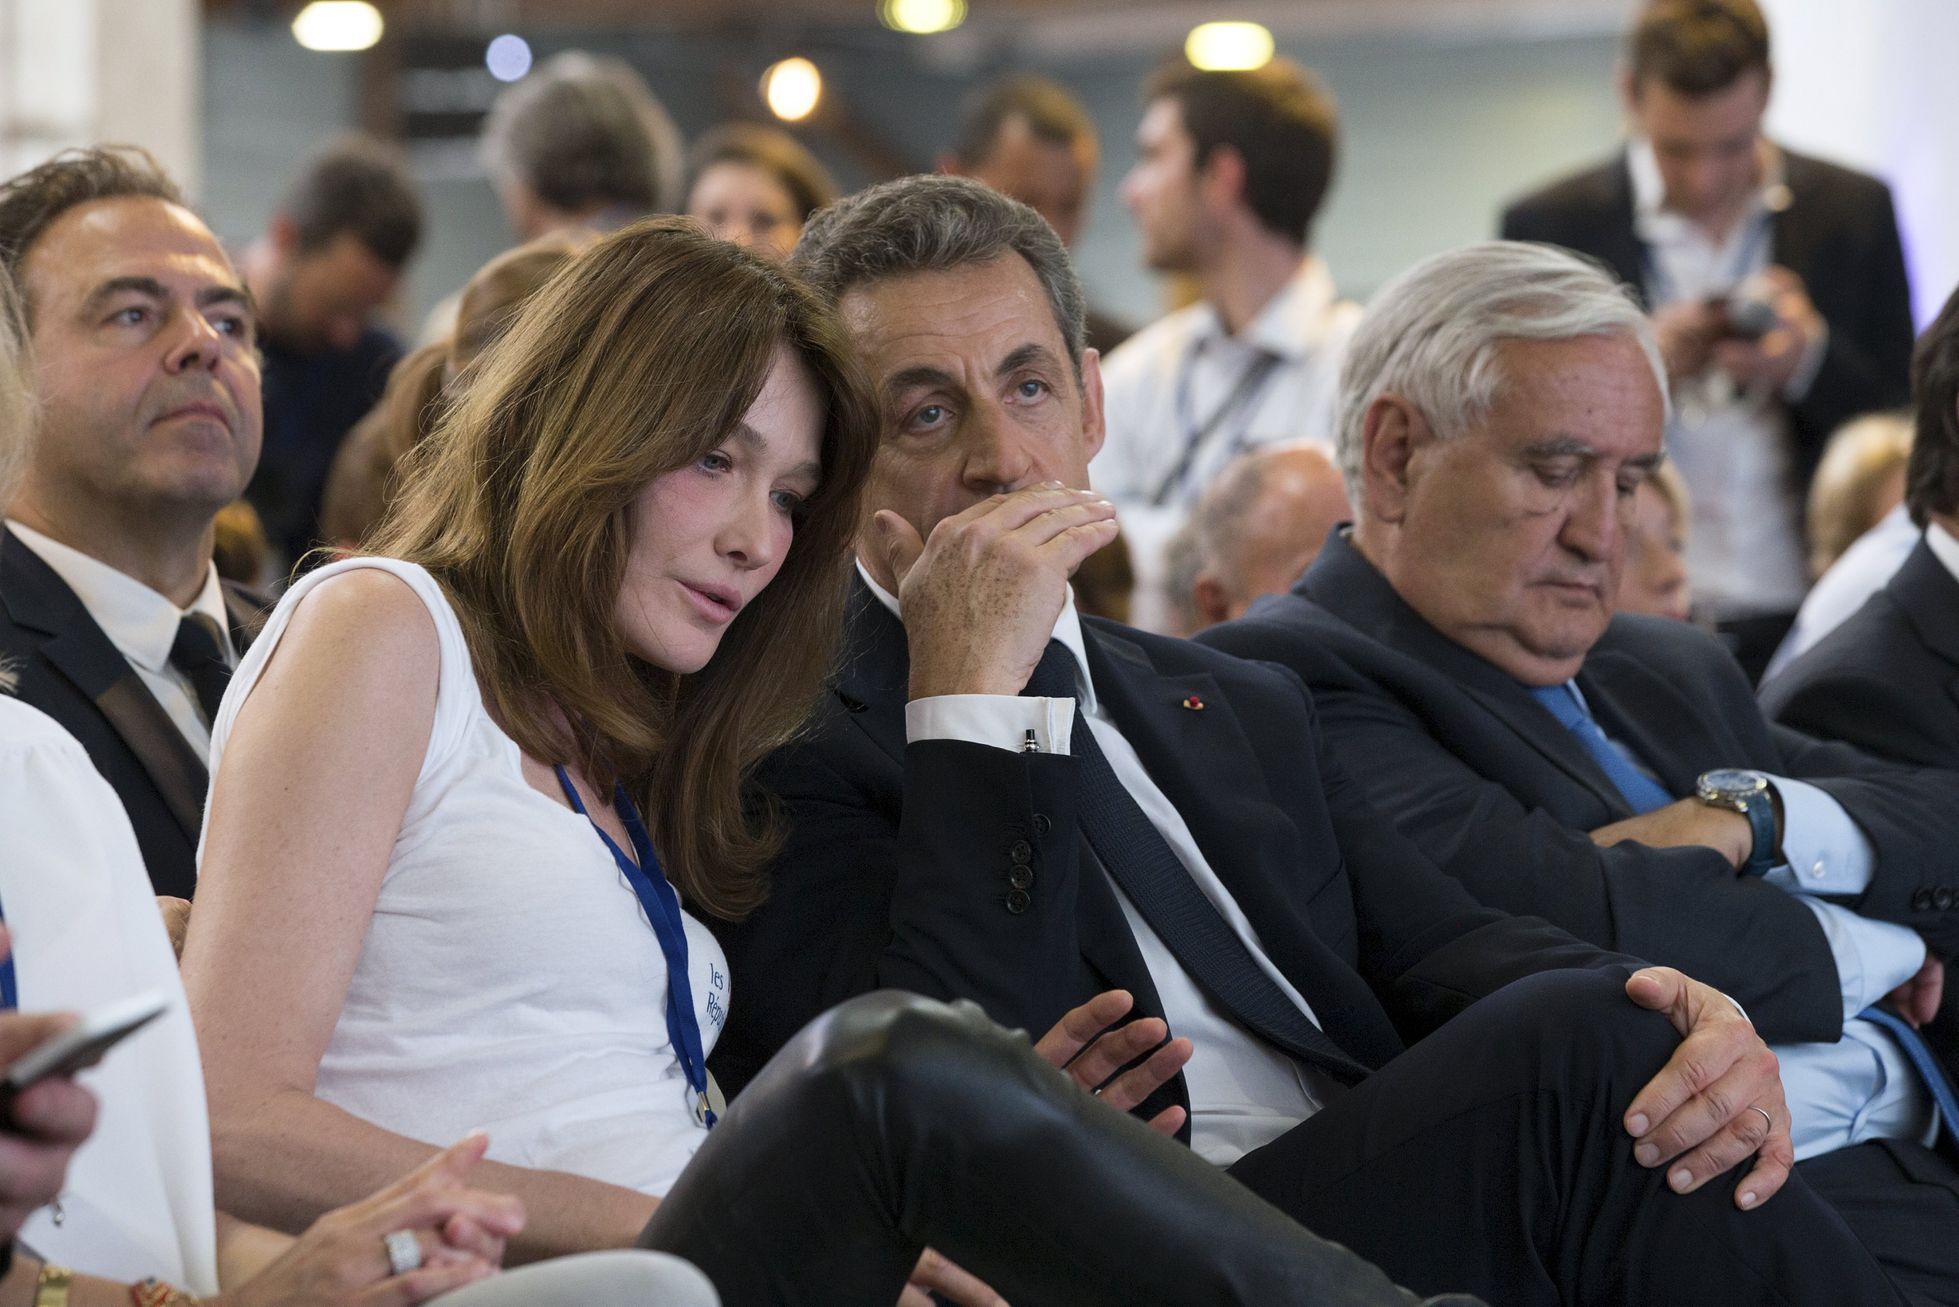 Nicolas Sarkozy, former French president and head of the newly renamed &quot;The Republicans&quot; political party, and his wife Carla Bruni-Sarkozy attend a rally in Paris